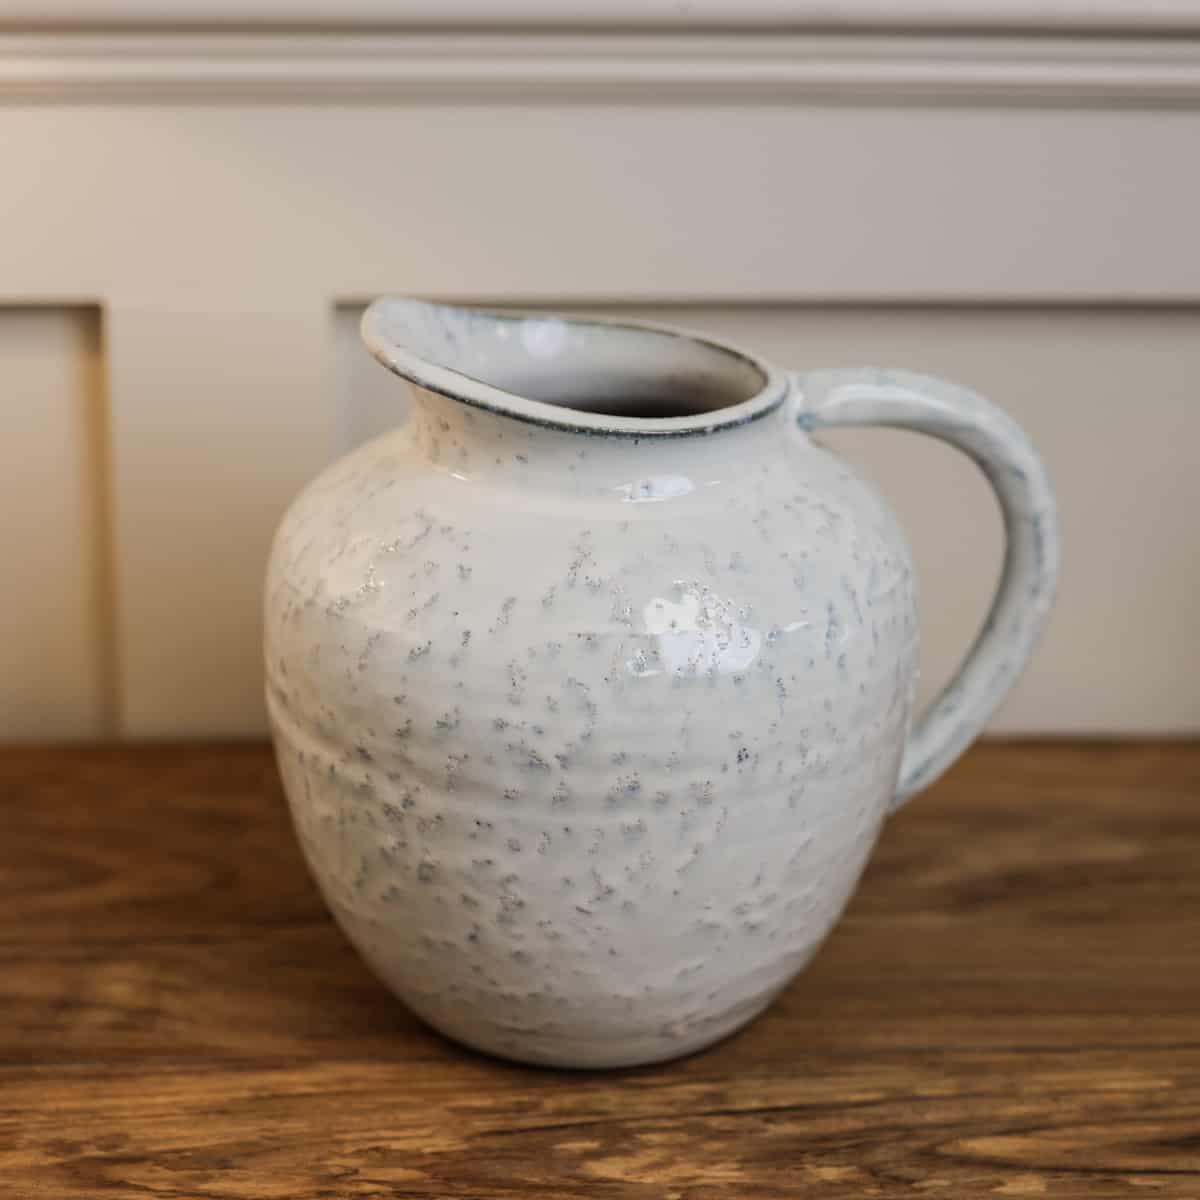 Small white ceramic jug from side on wooden table.